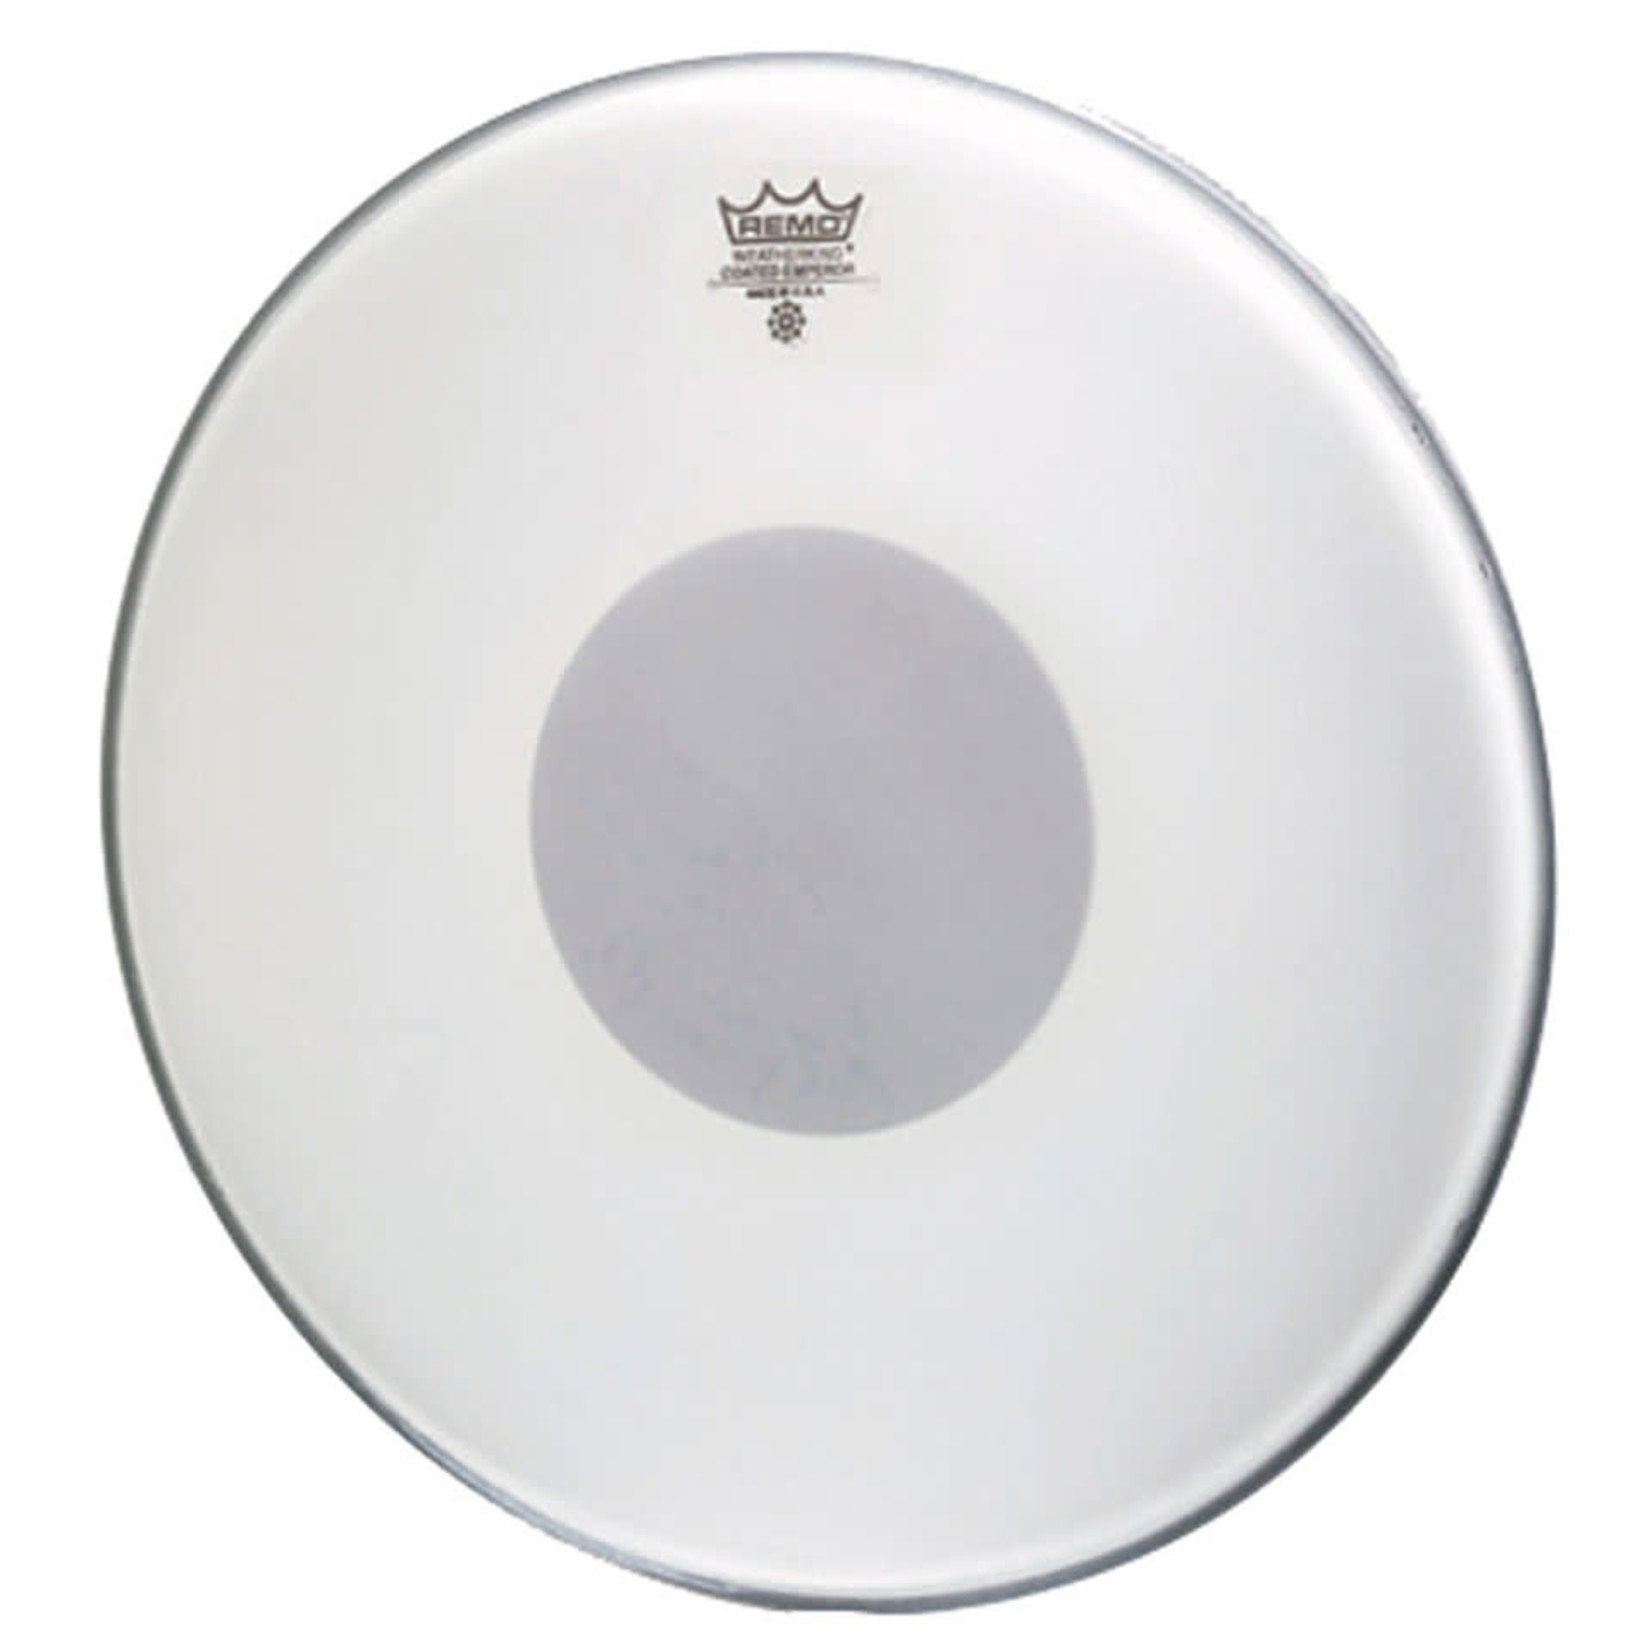 Remo Remo 14" Controlled Sound Emperor Coated Drumhead BE011410